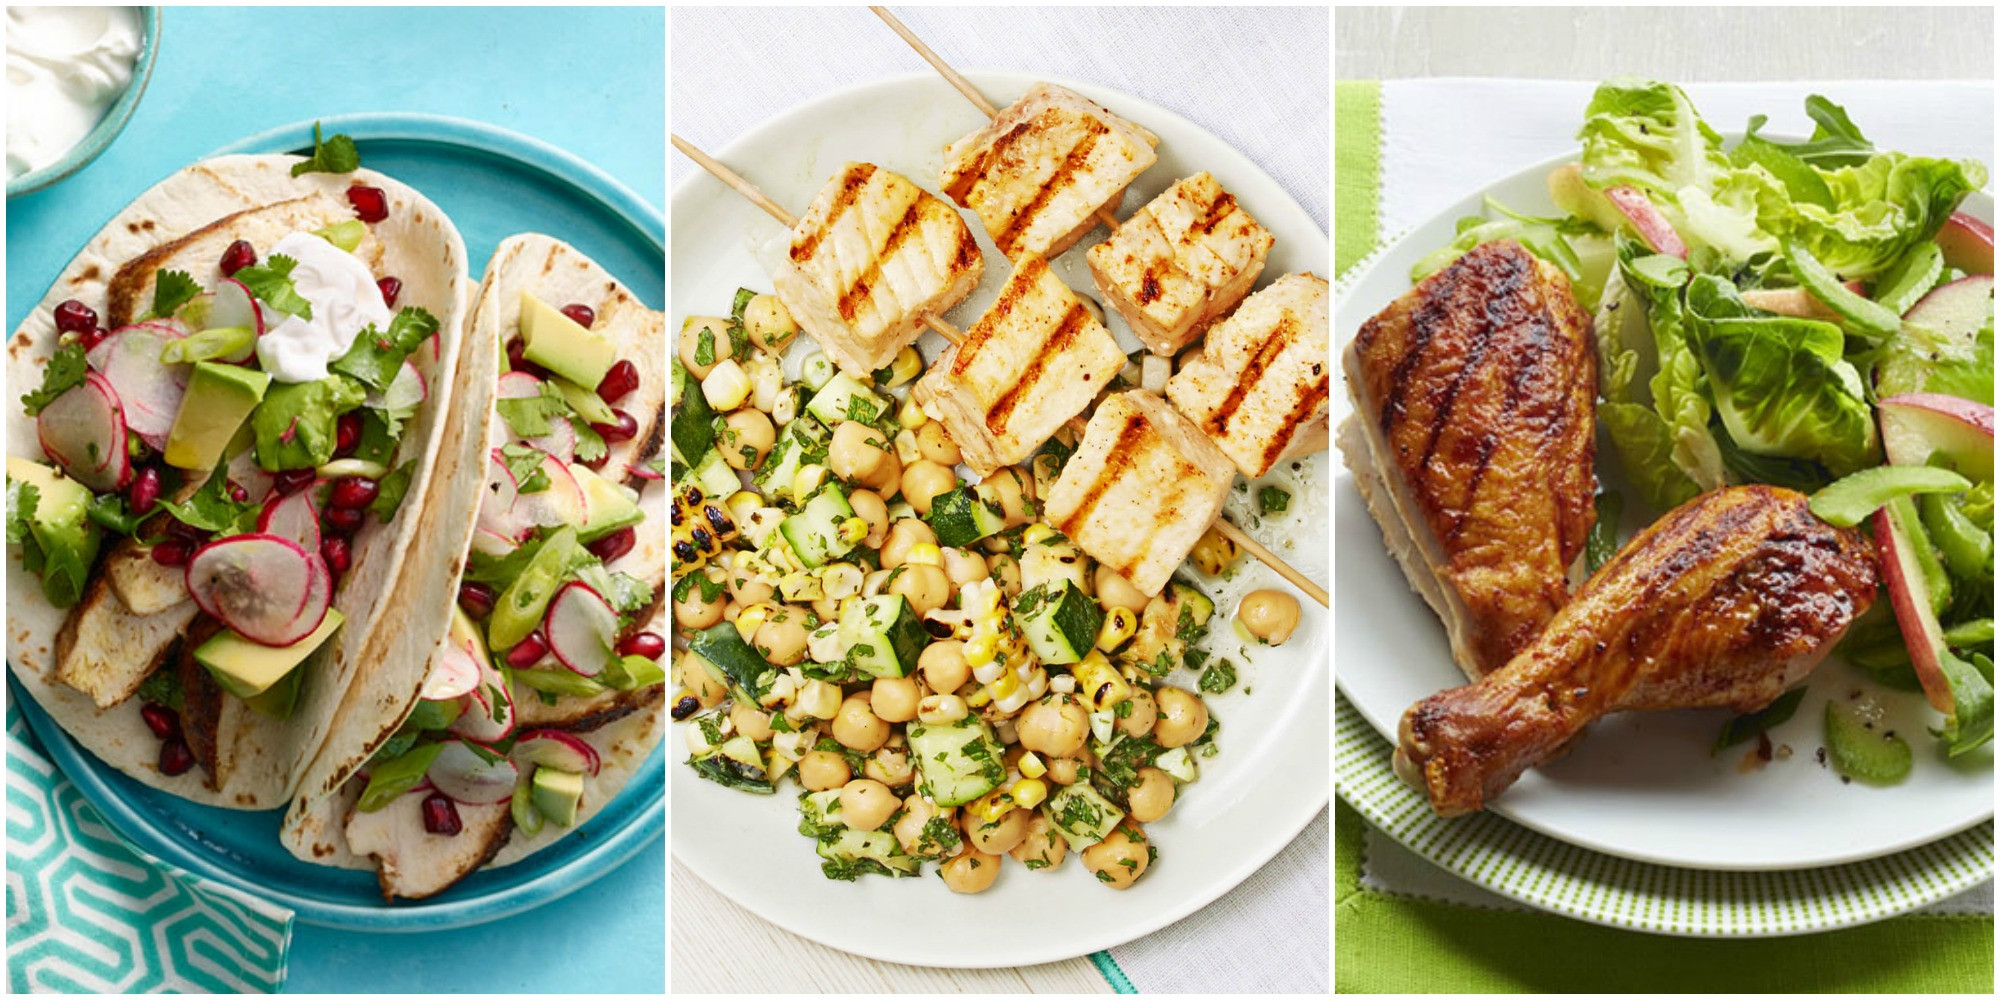 Best Summer Dinners
 60 Best Summer Dinner Recipes Quick and Easy Summer Meal